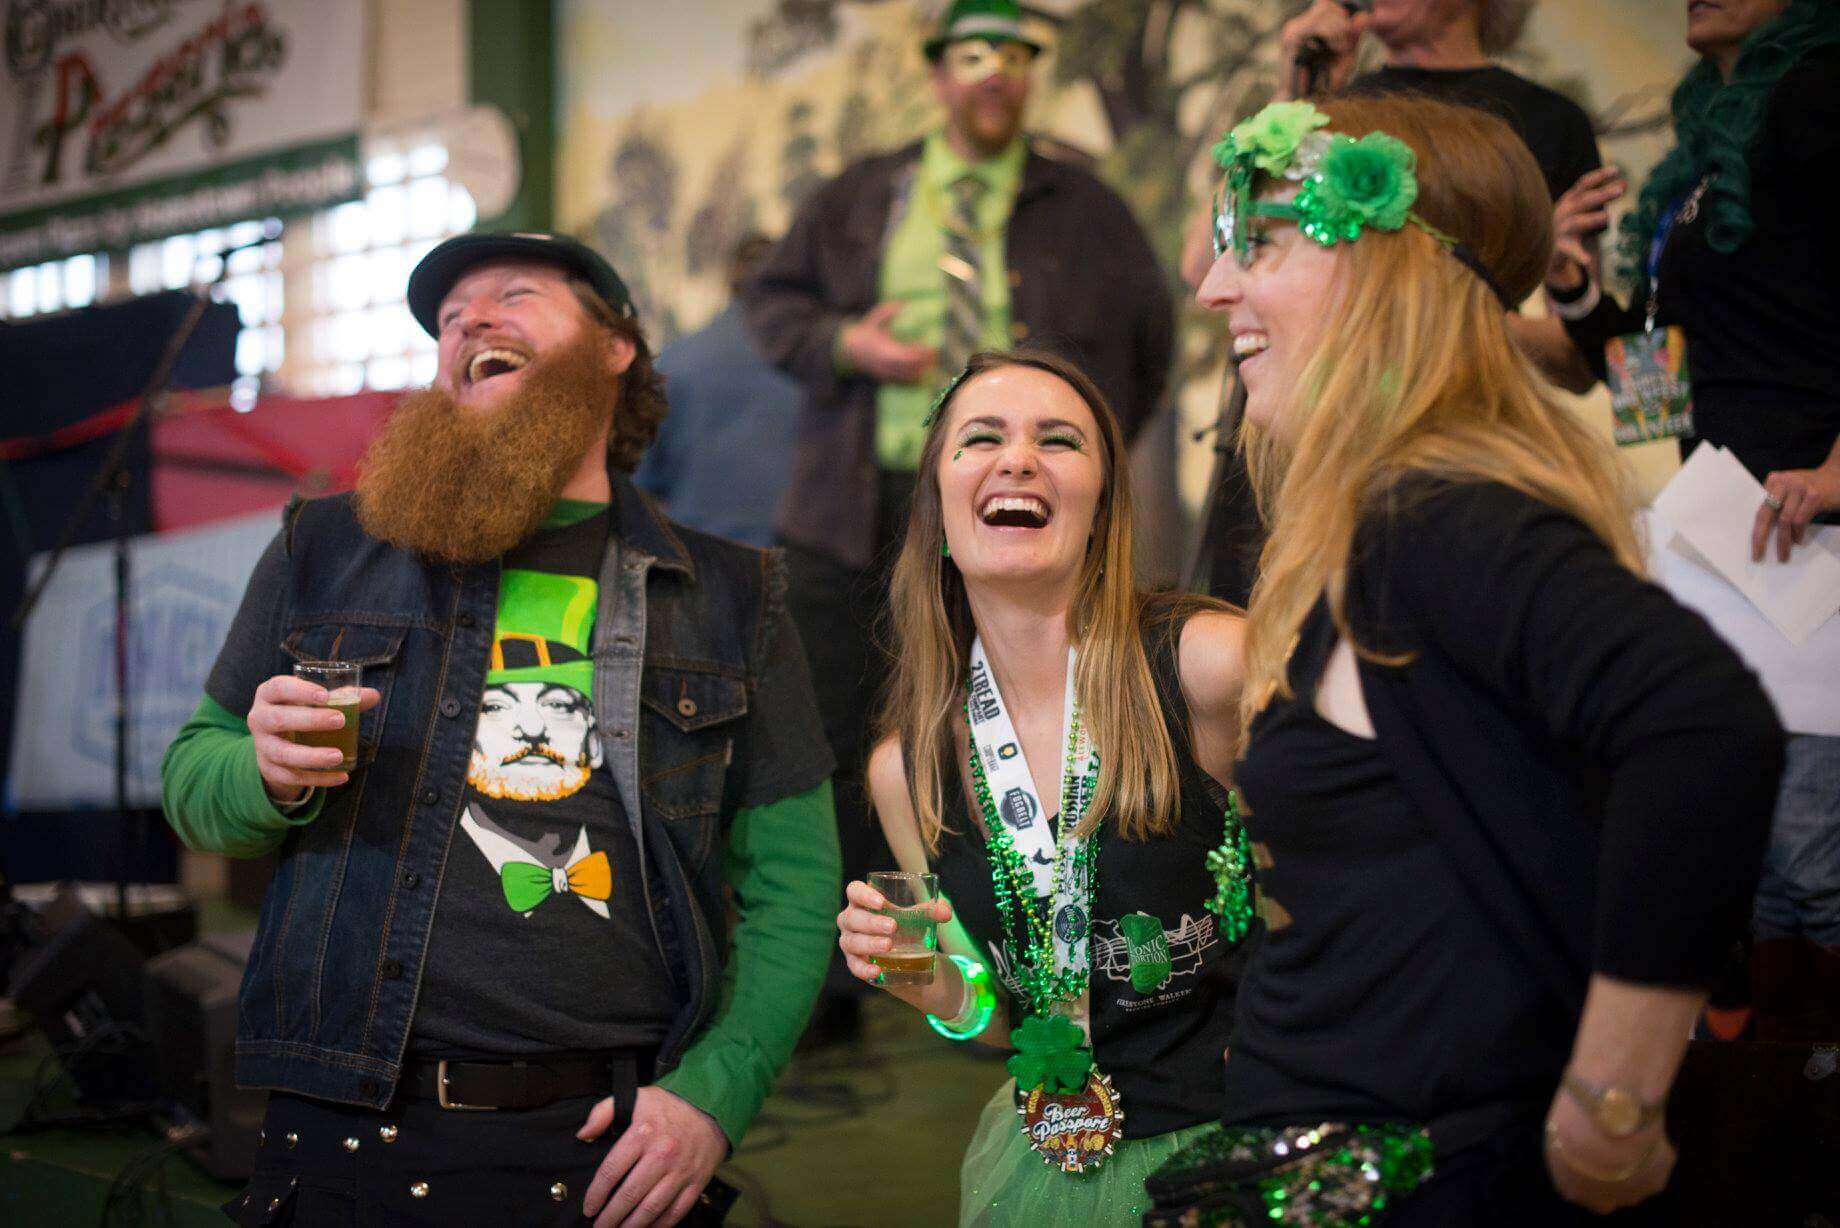 People laughing drinking beer and dressed for St. Patrick's Day